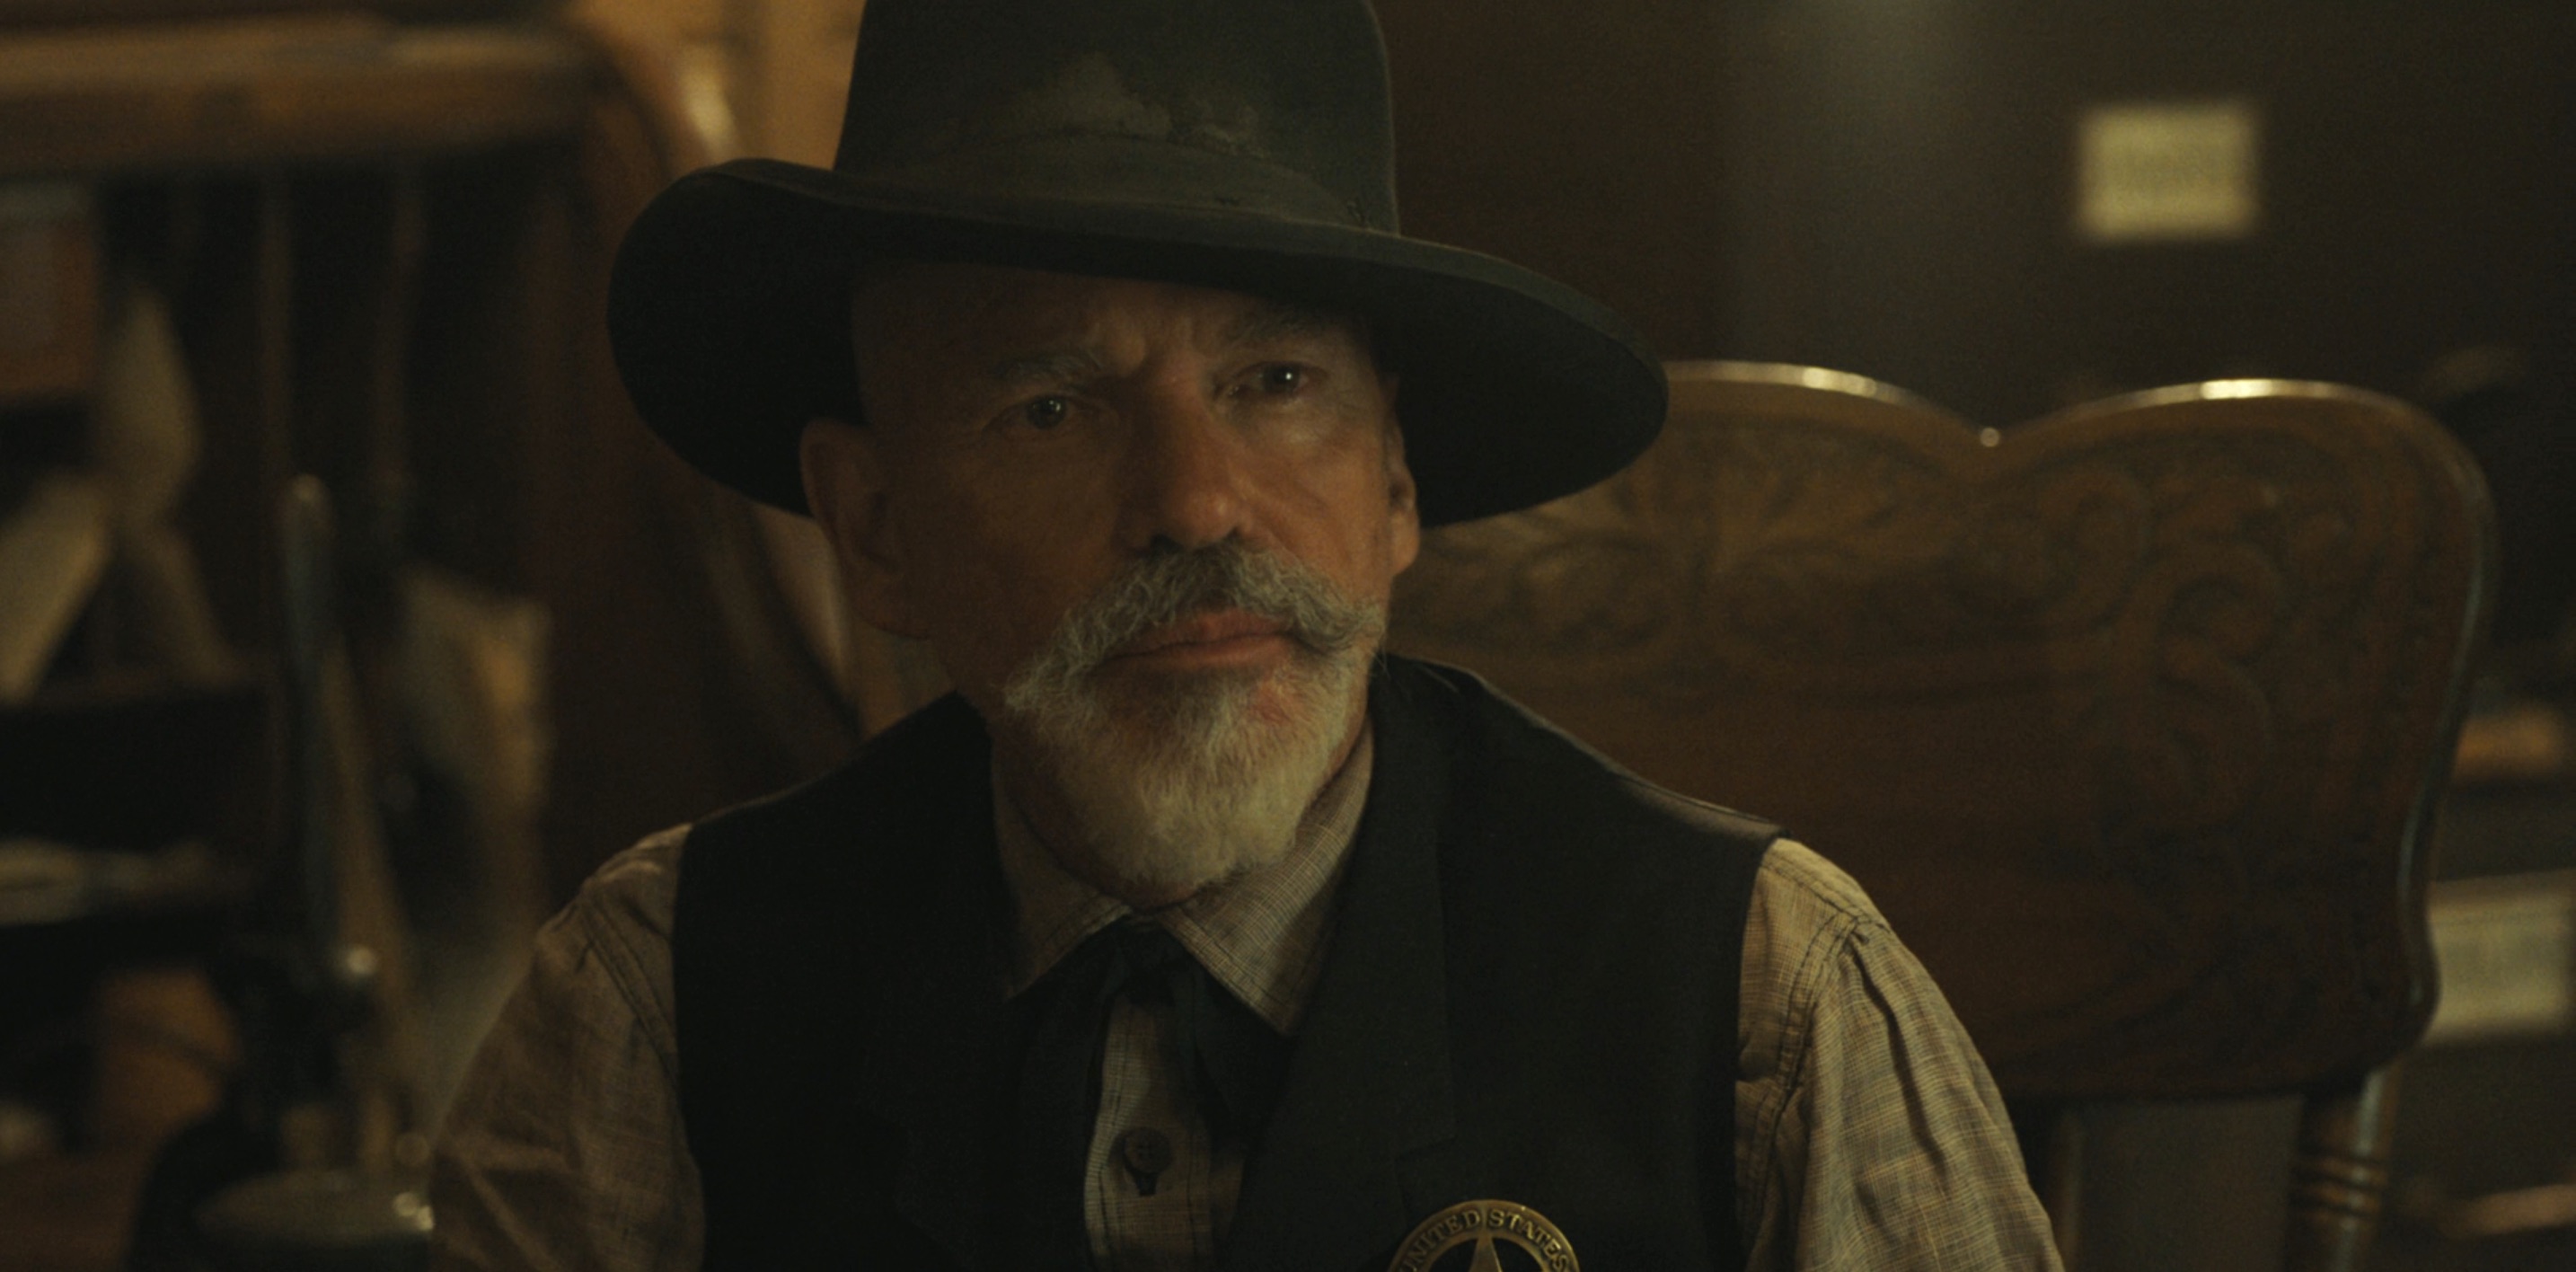 1883 Cast - Billy Bob Thornton as Jim Courtright